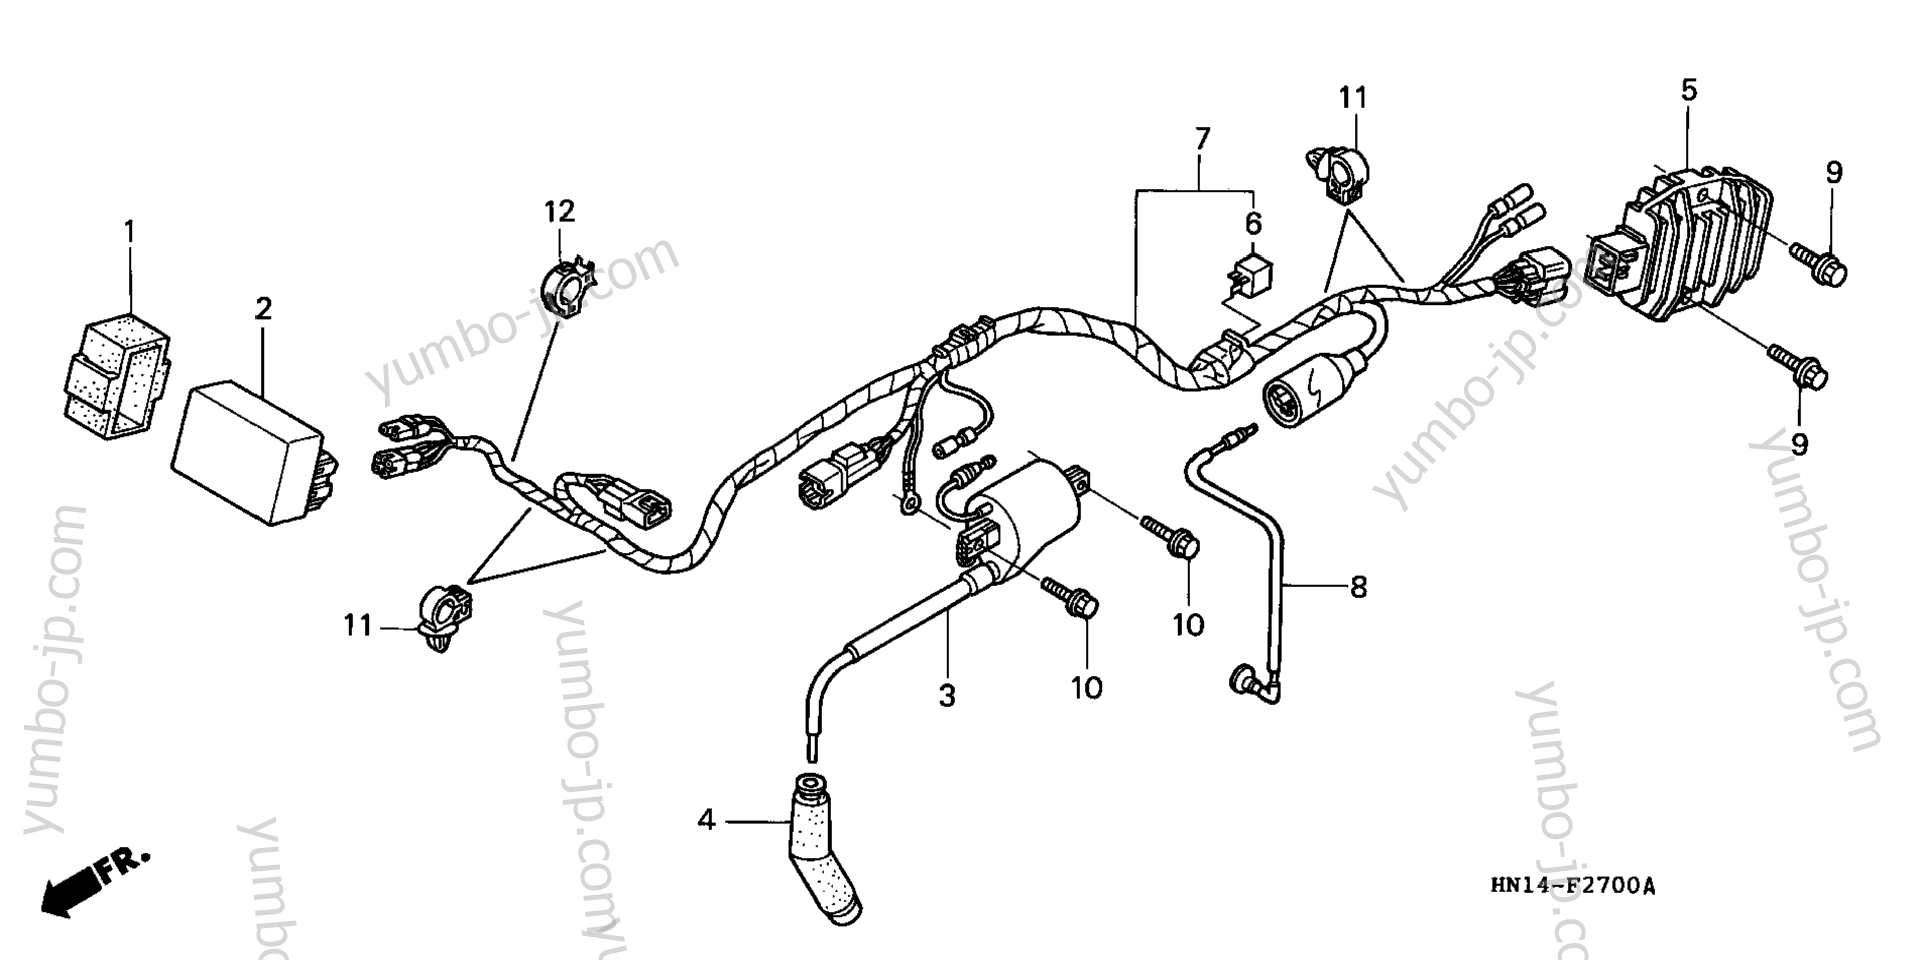 WIRE HARNESS ('99-'04) for ATVs HONDA TRX400EX A 2001 year